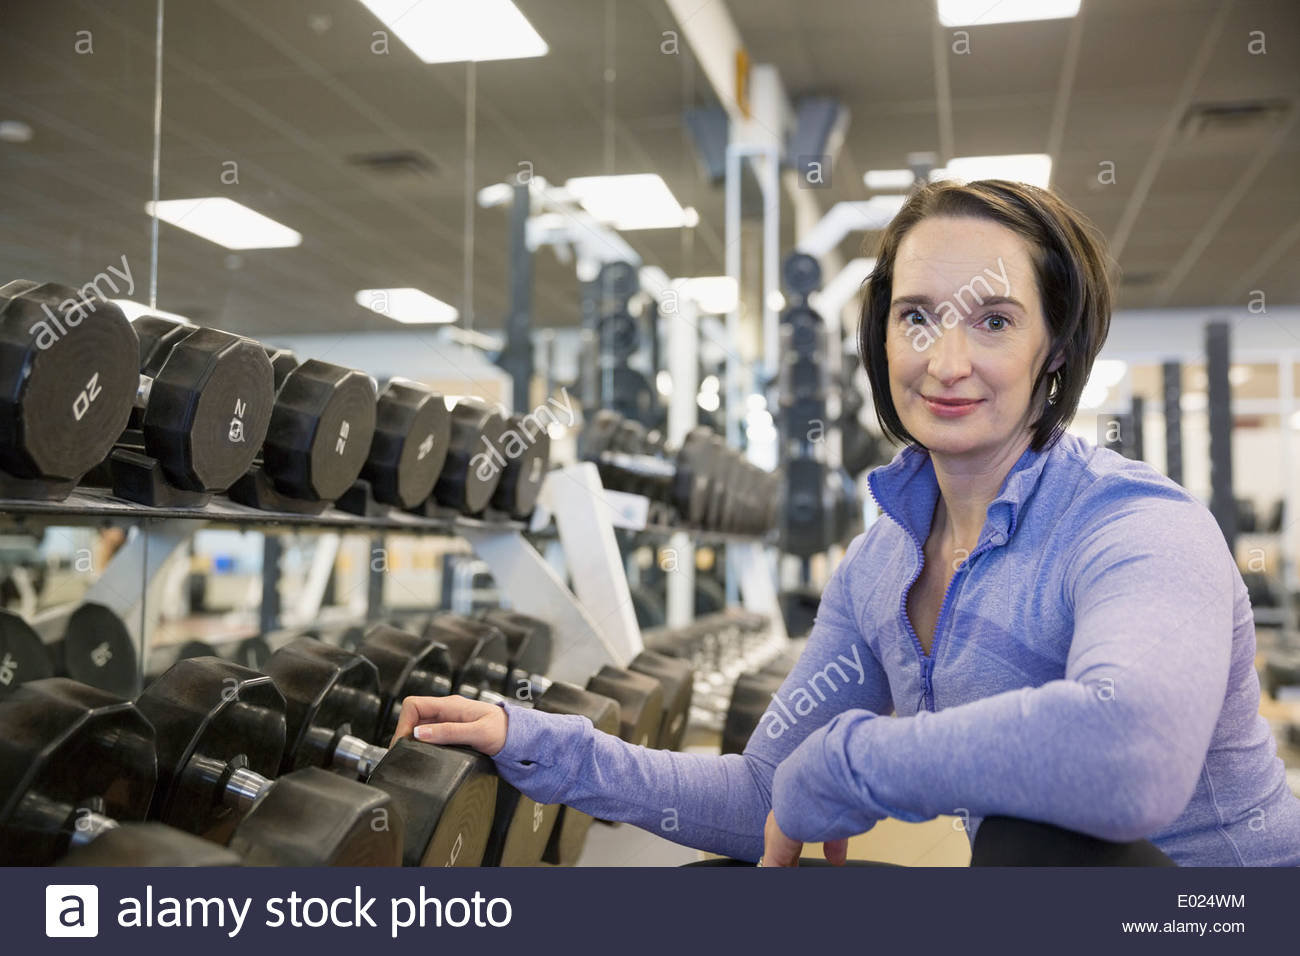 Portrait of woman weight lifting at gym Stock Photo